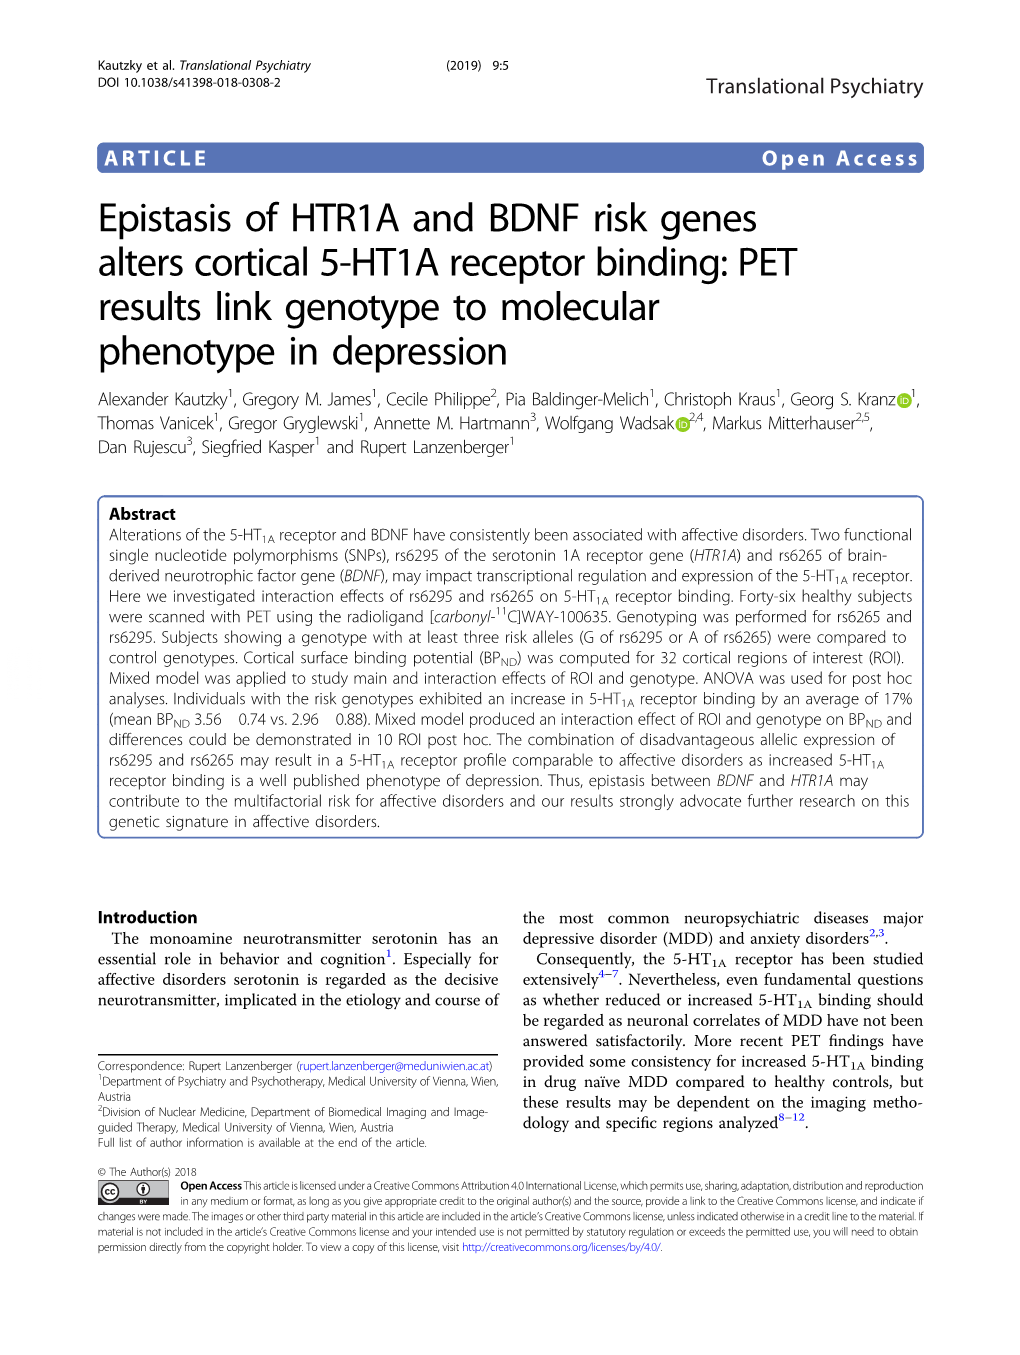 Epistasis of HTR1A and BDNF Risk Genes Alters Cortical 5-HT1A